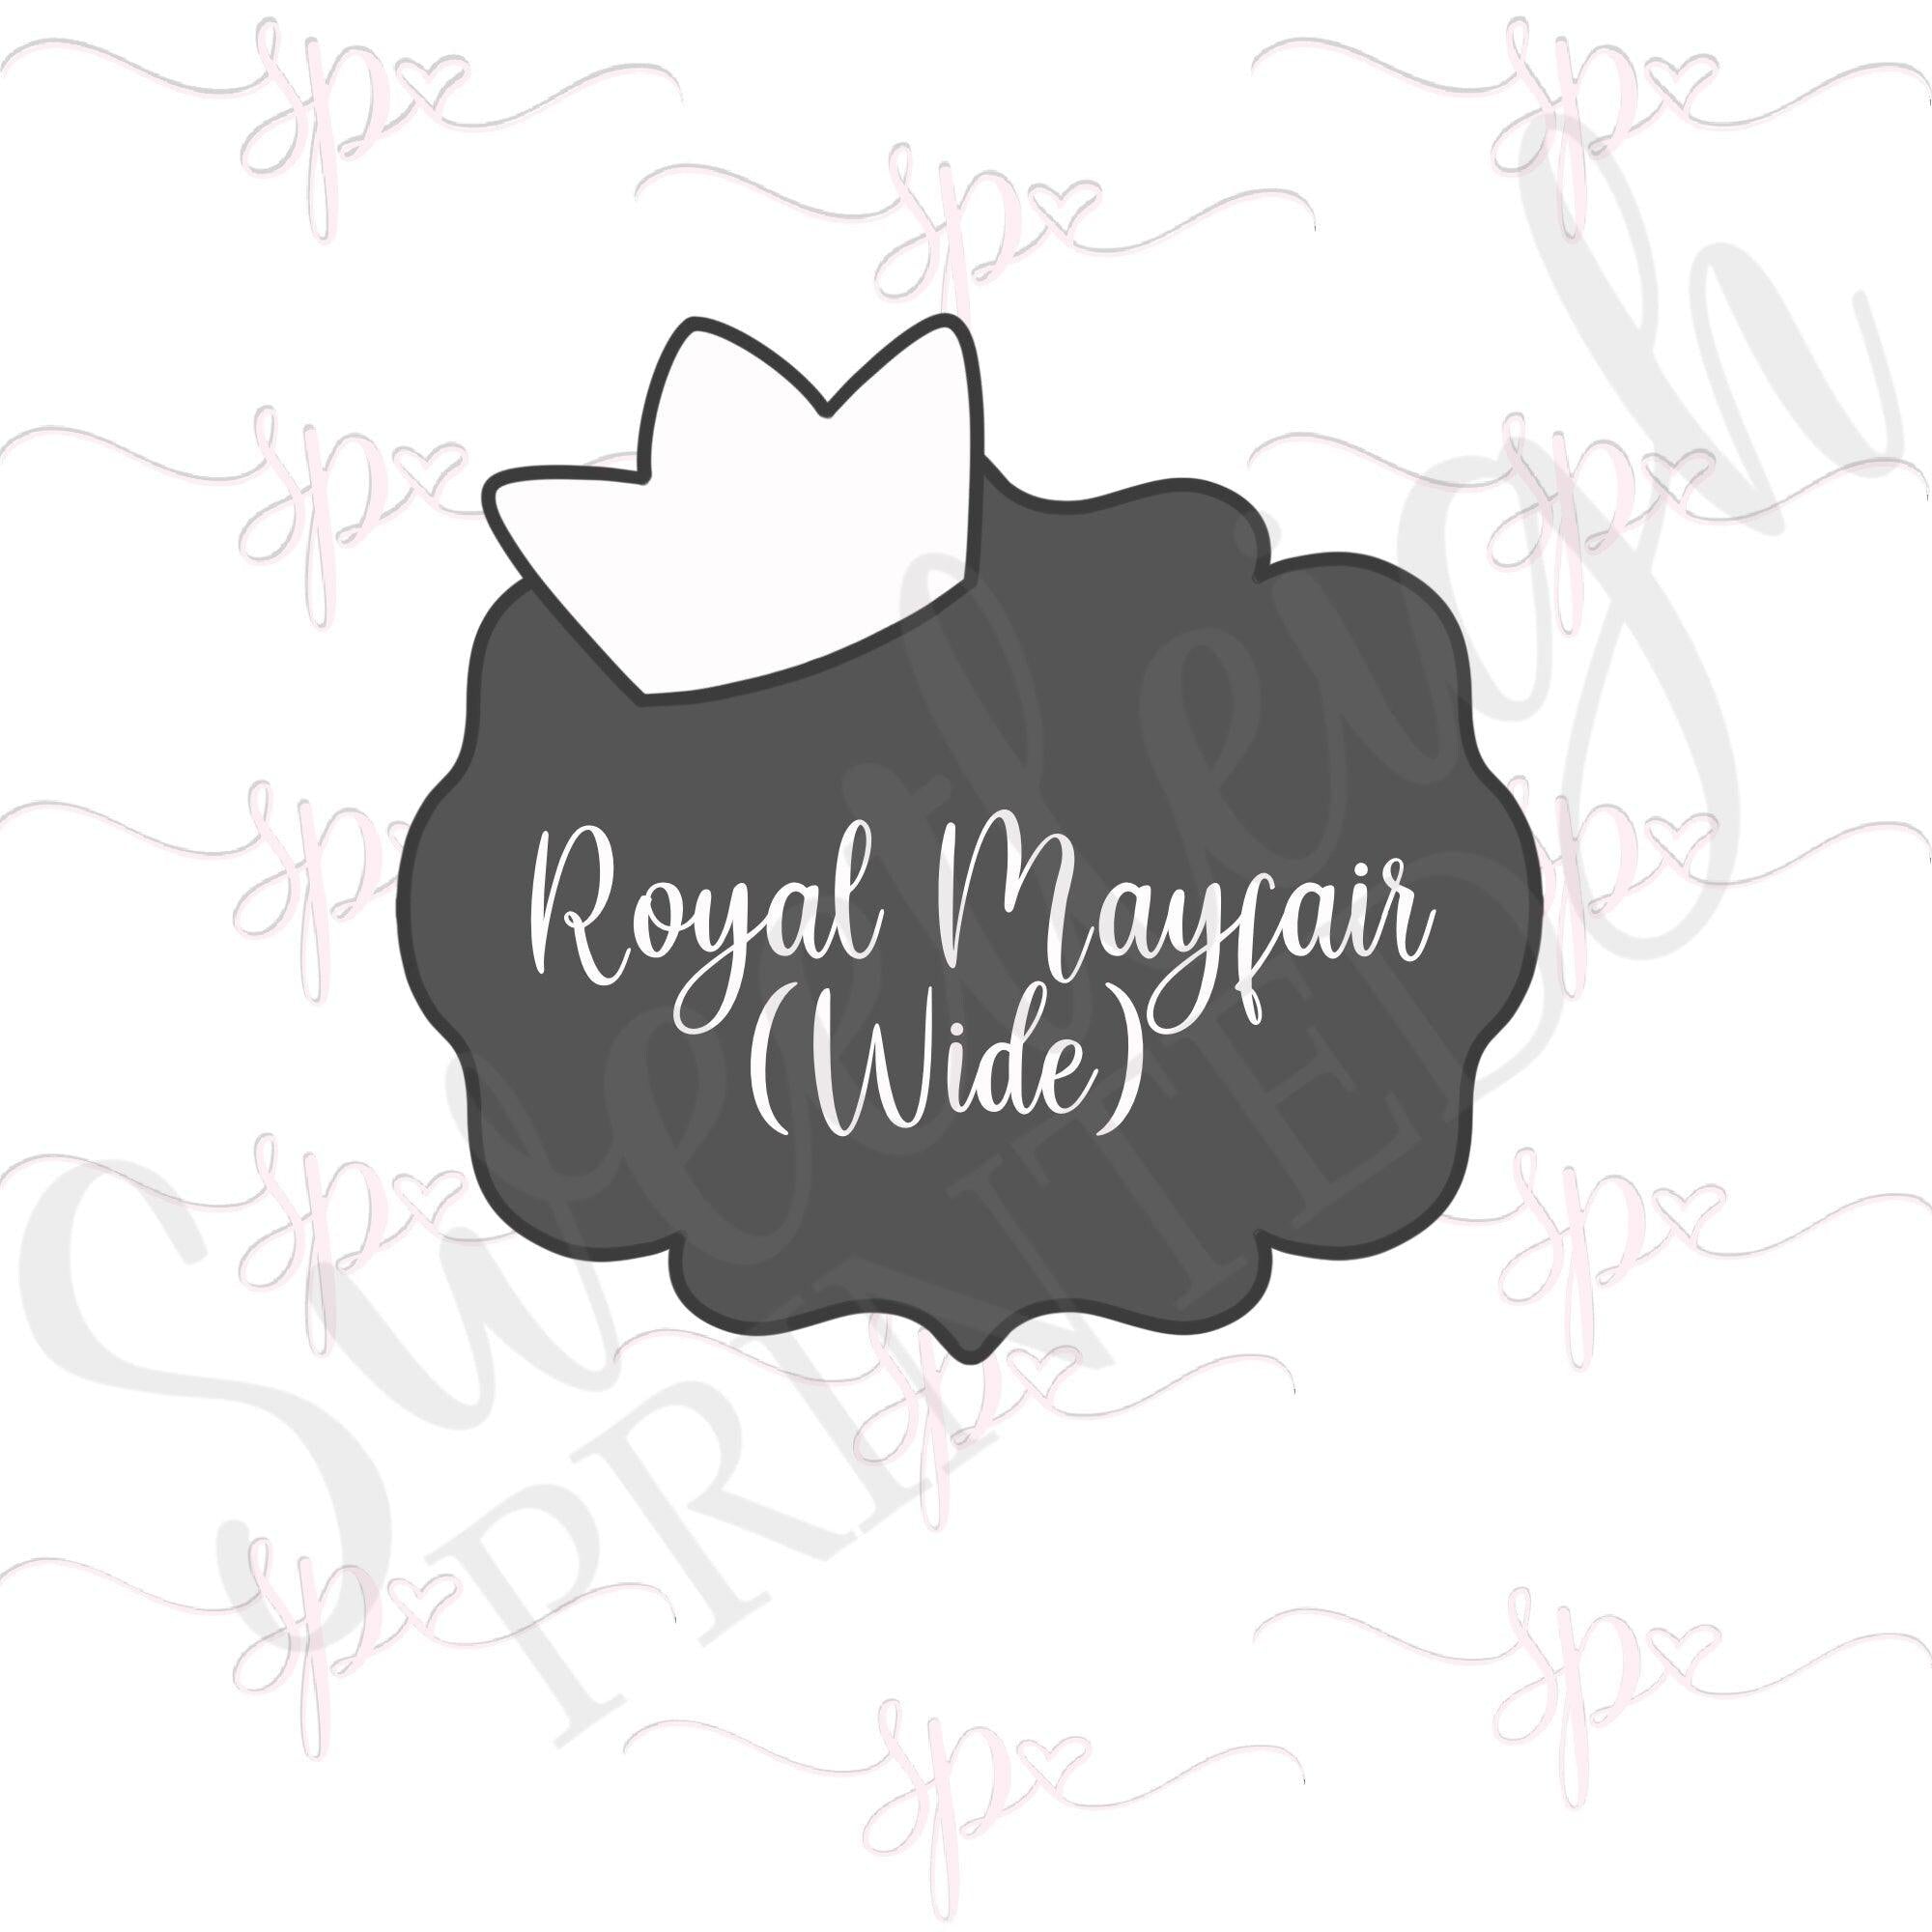 Wide Royal Mayfair Plaque Cookie Cutter - Sweetleigh 